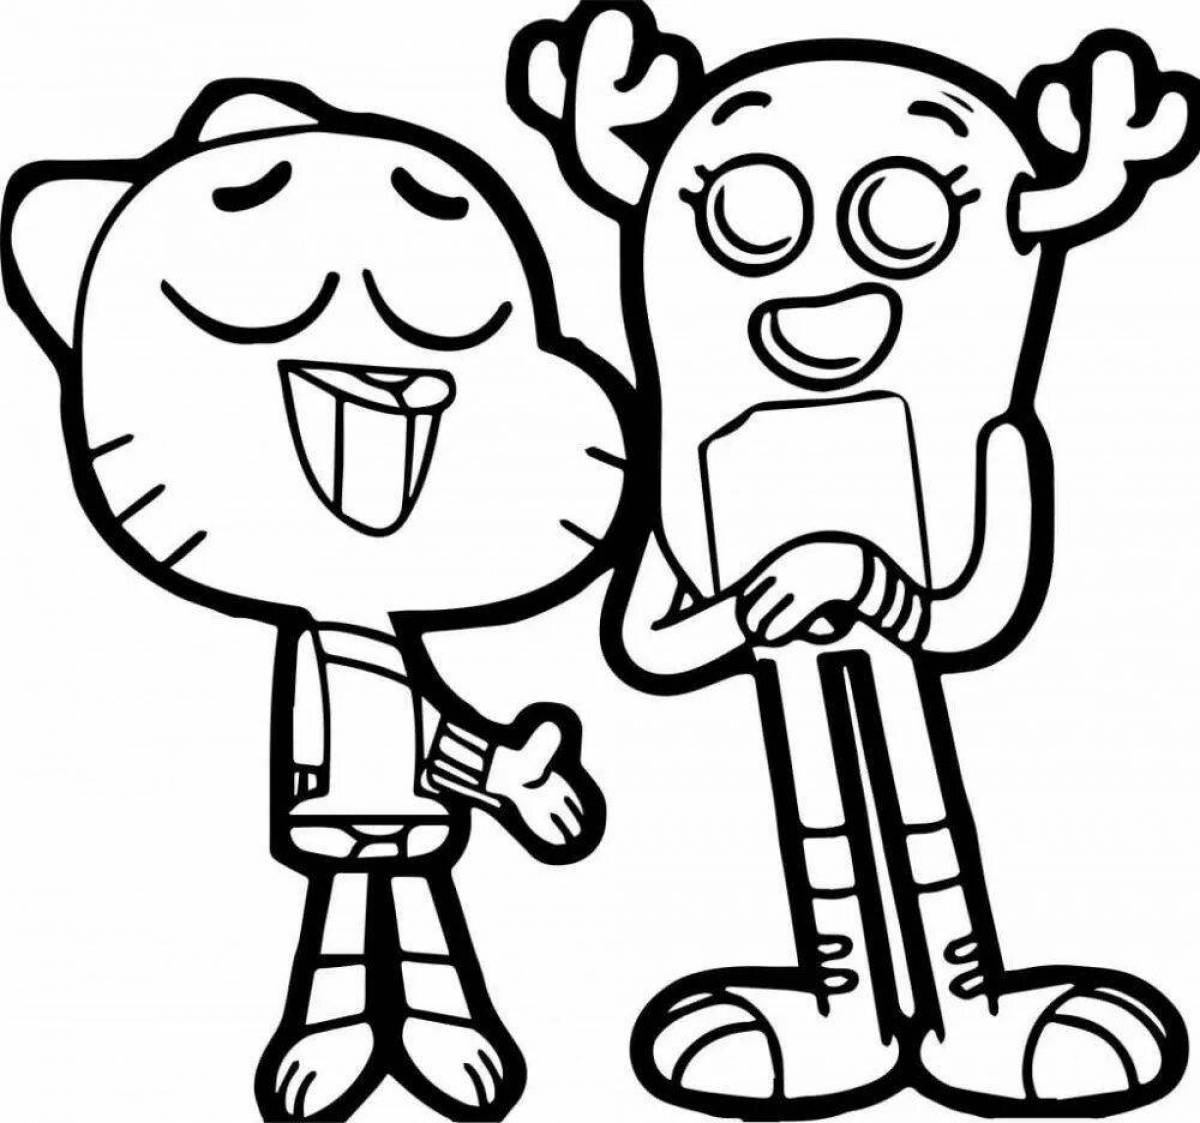 Gumball coloring page